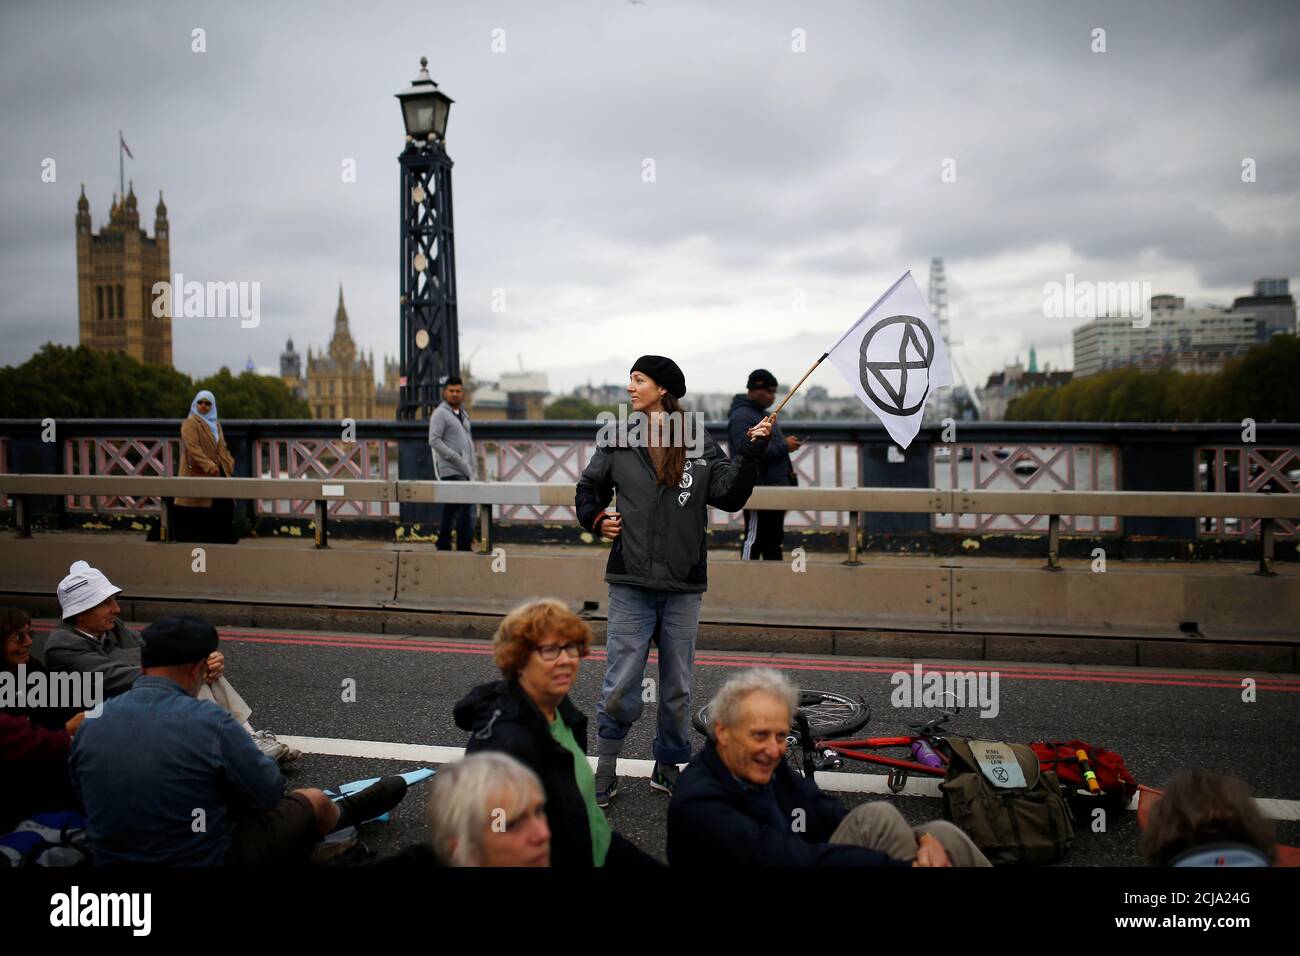 An activist holds a flag with the extinction symbol at Lambeth Bridge during the Extinction Rebellion protest in London, Britain October 7, 2019. REUTERS/Henry Nicholls Stock Photo